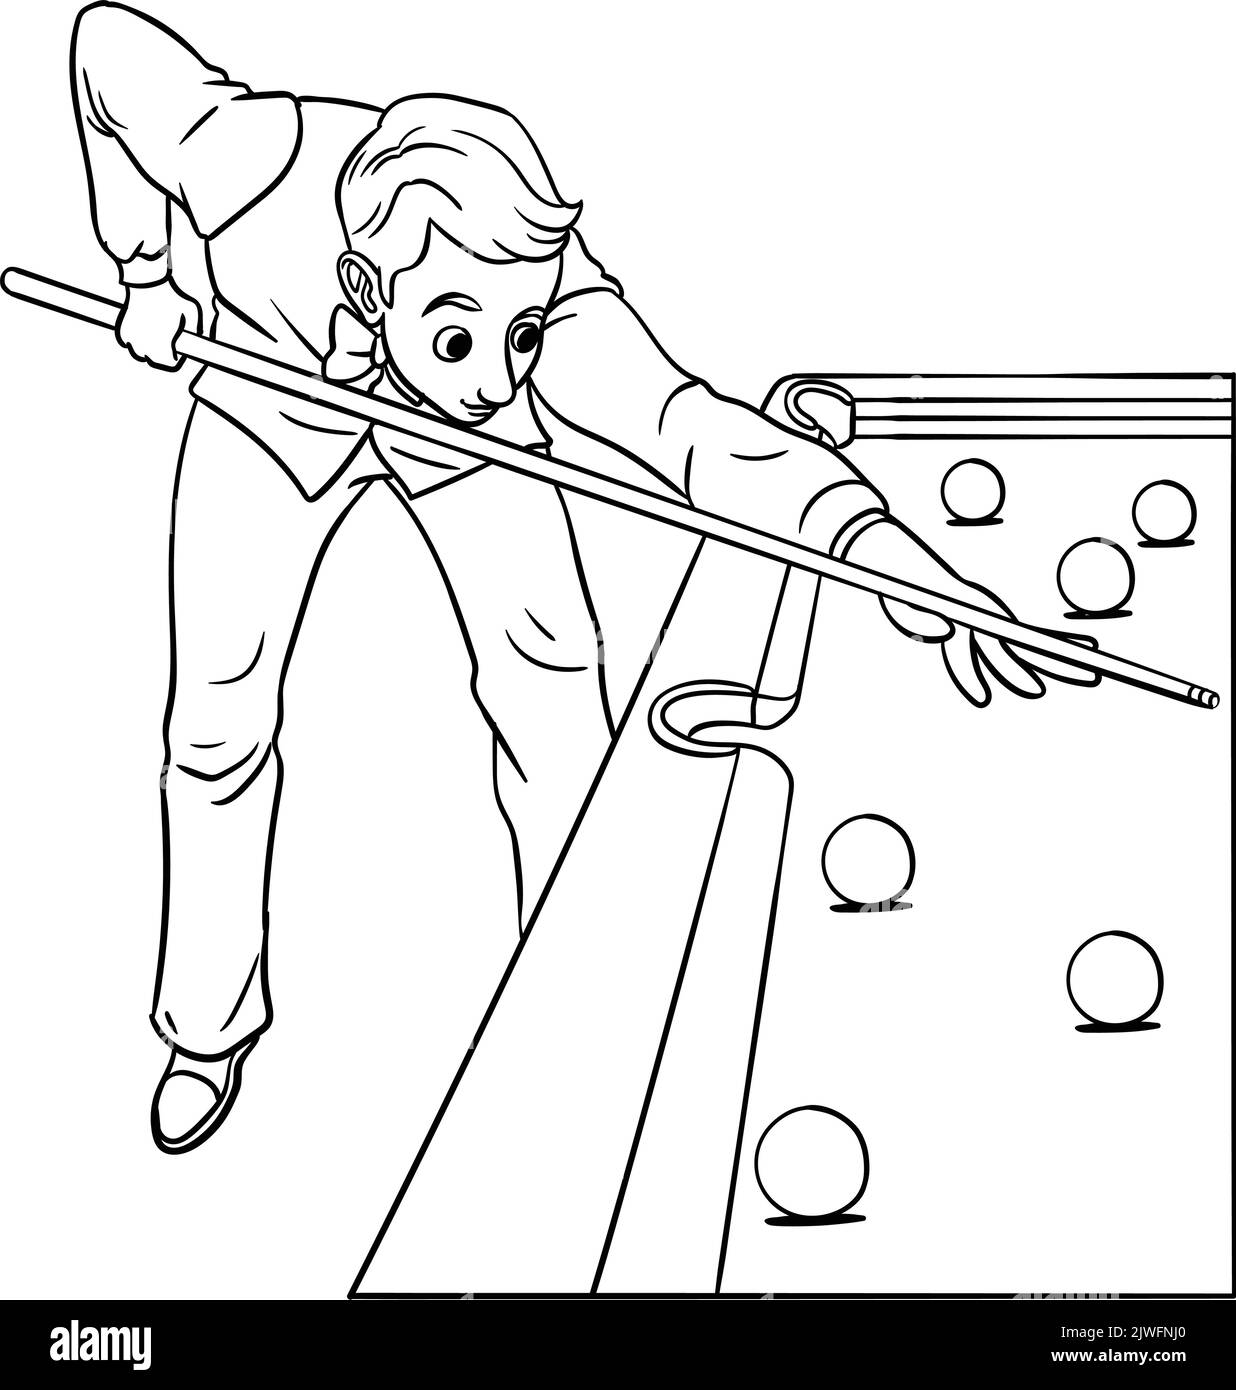 Snooker Isolated Coloring Page for Kids Stock Vector